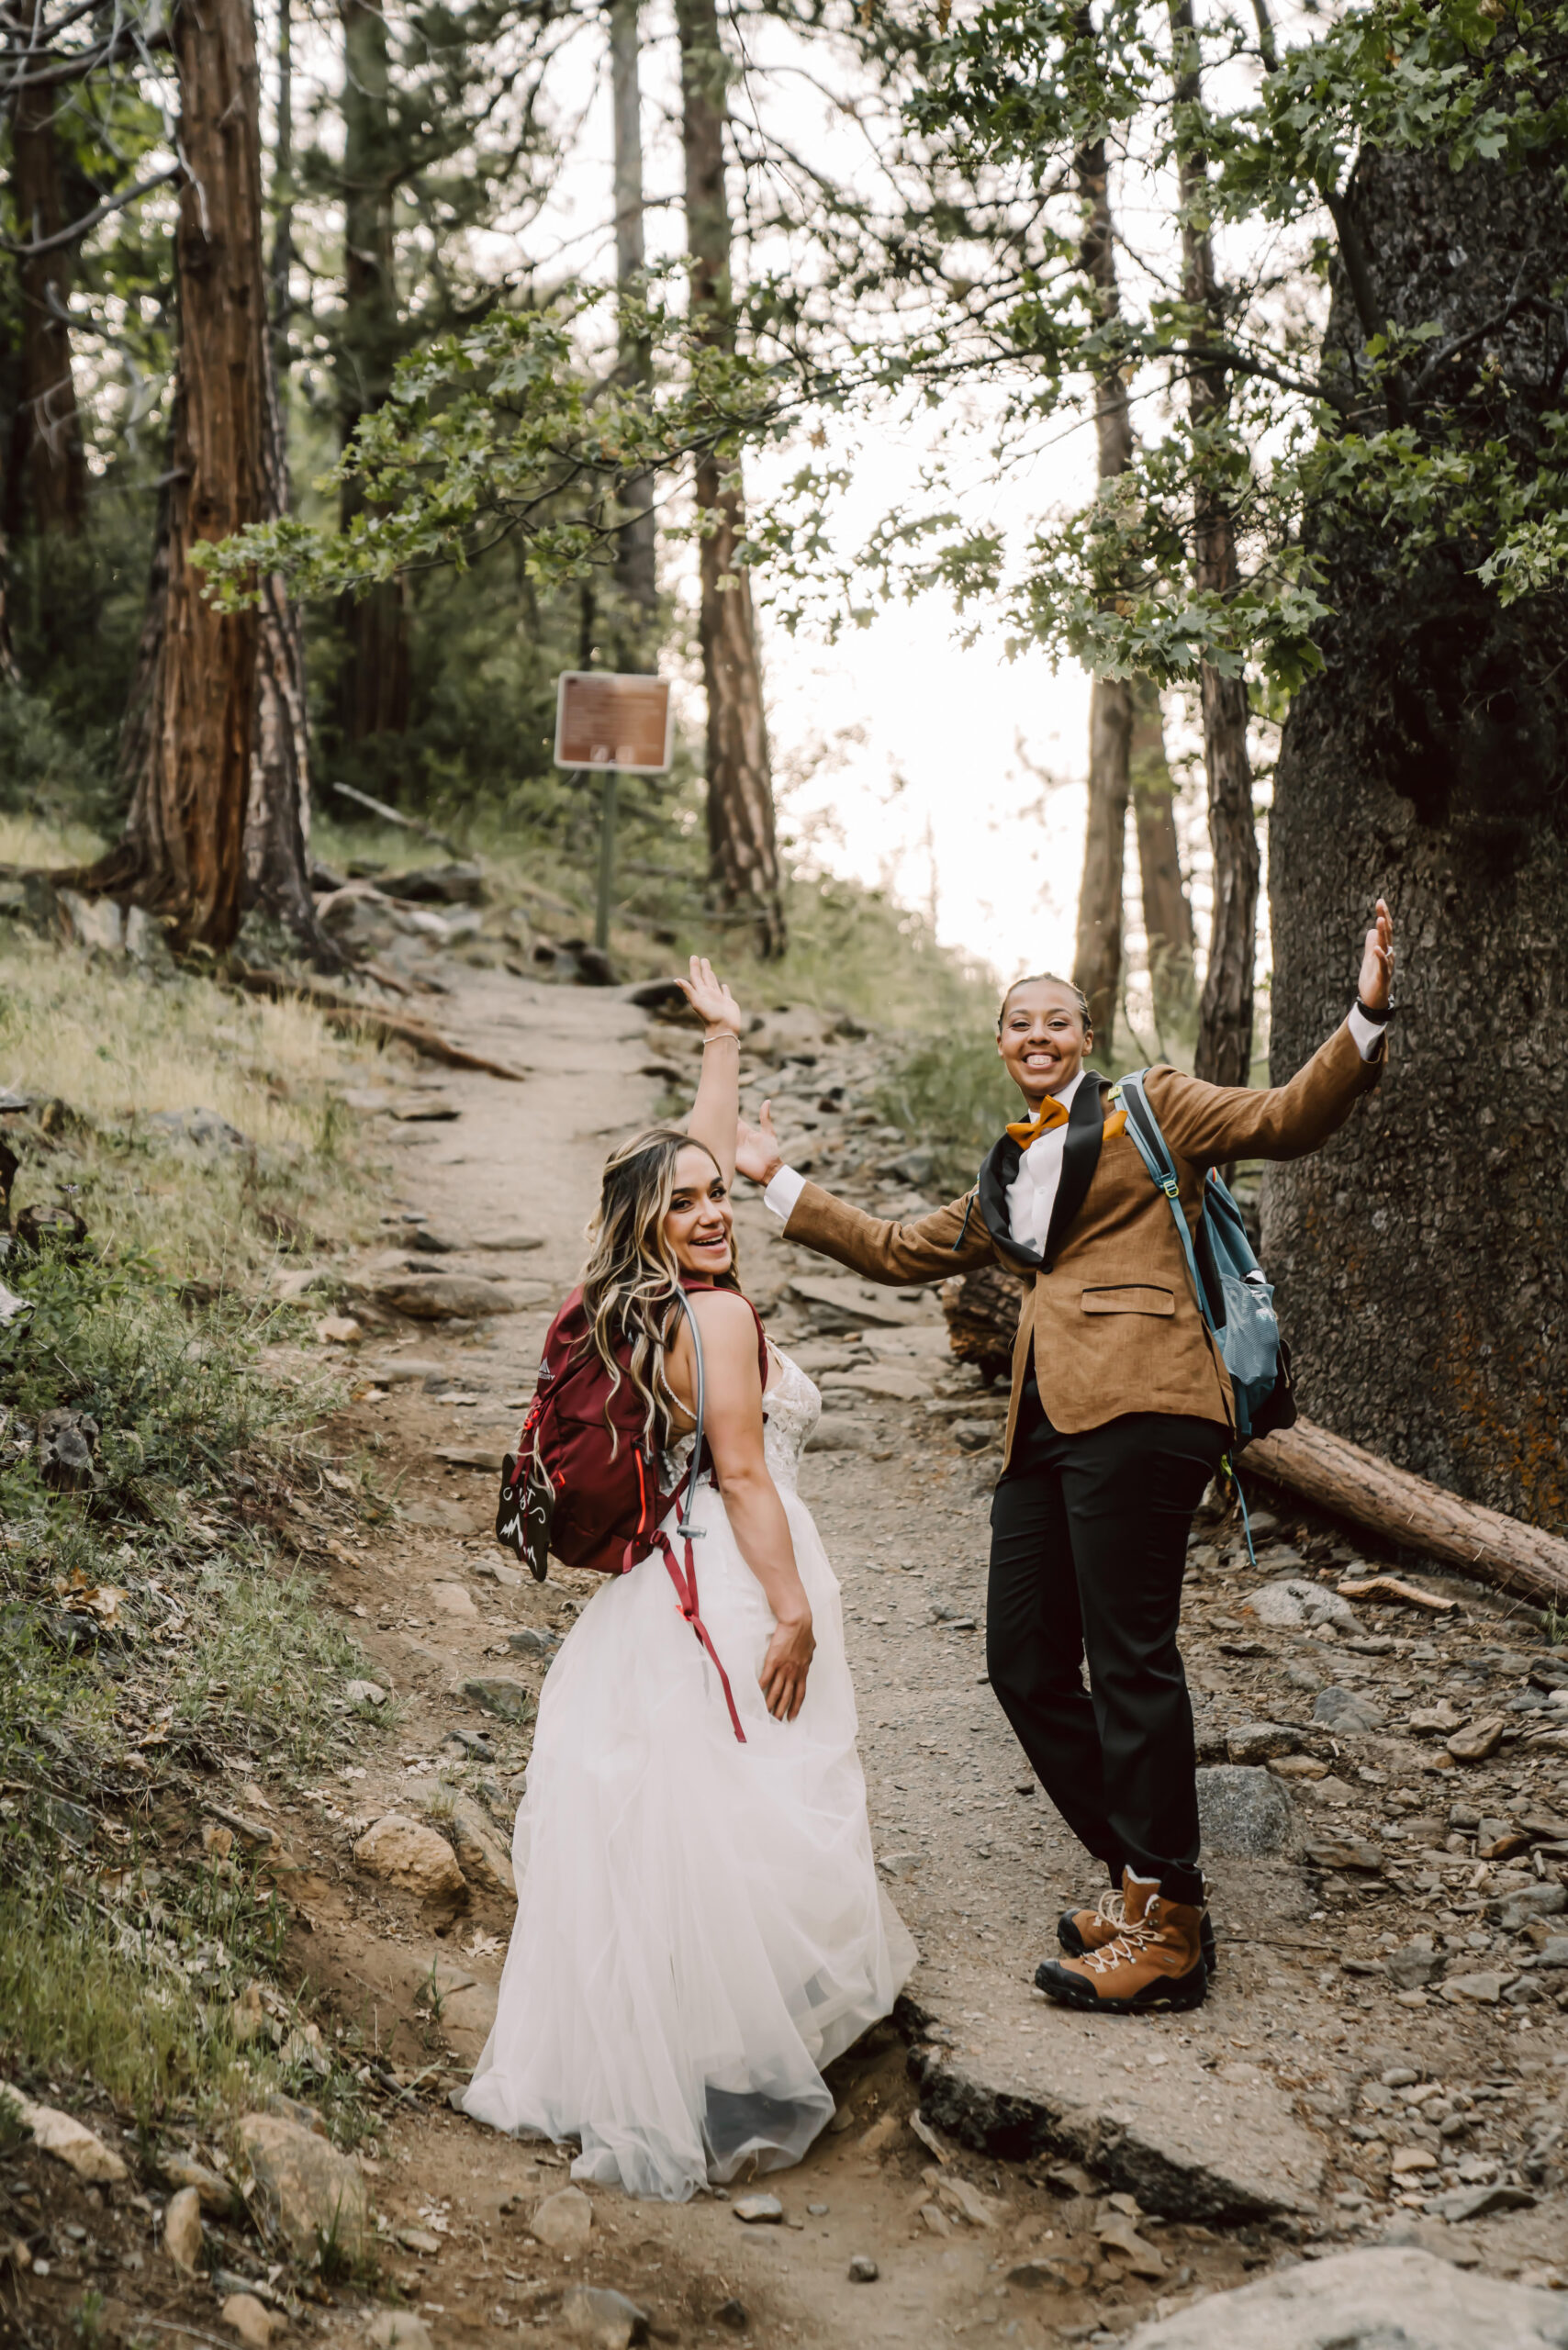 A wedding couple hiking in their wedding clothes for their Elopement day in the mountains